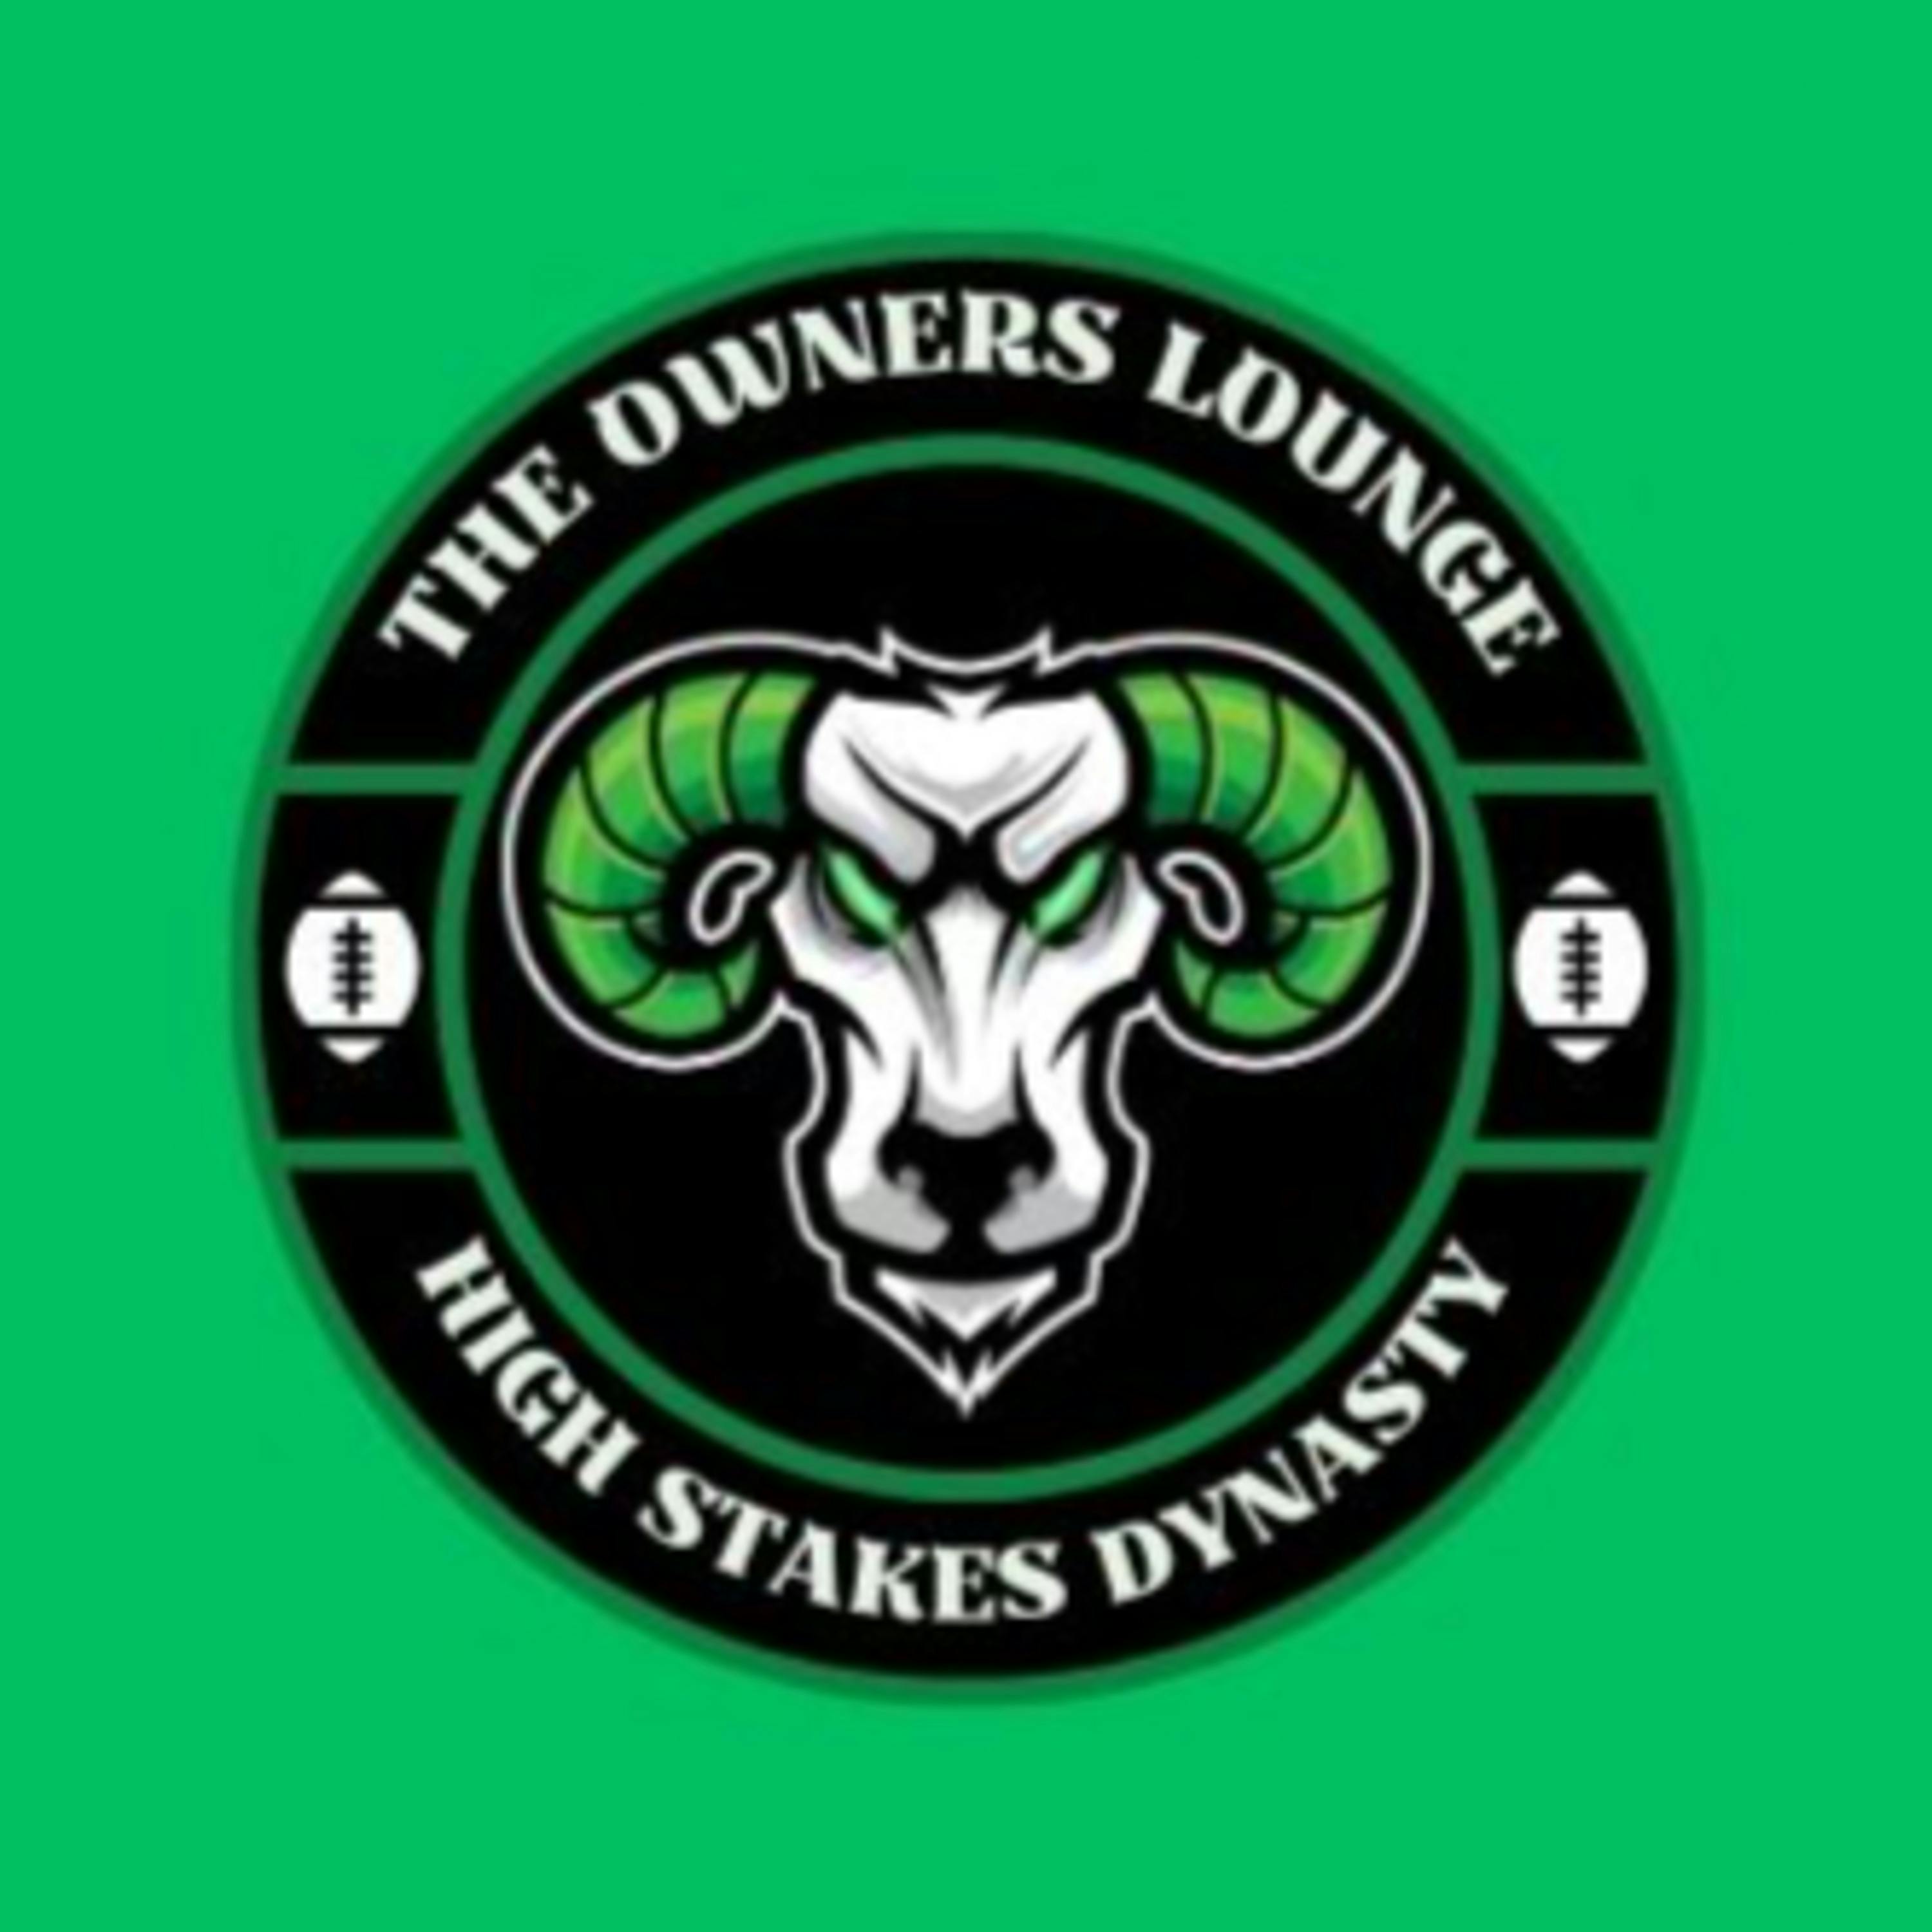 TiME TO GO MR PACHECO | HiGH STAKES DYNASTY | THE OWNERS LOUNGE | Episode III